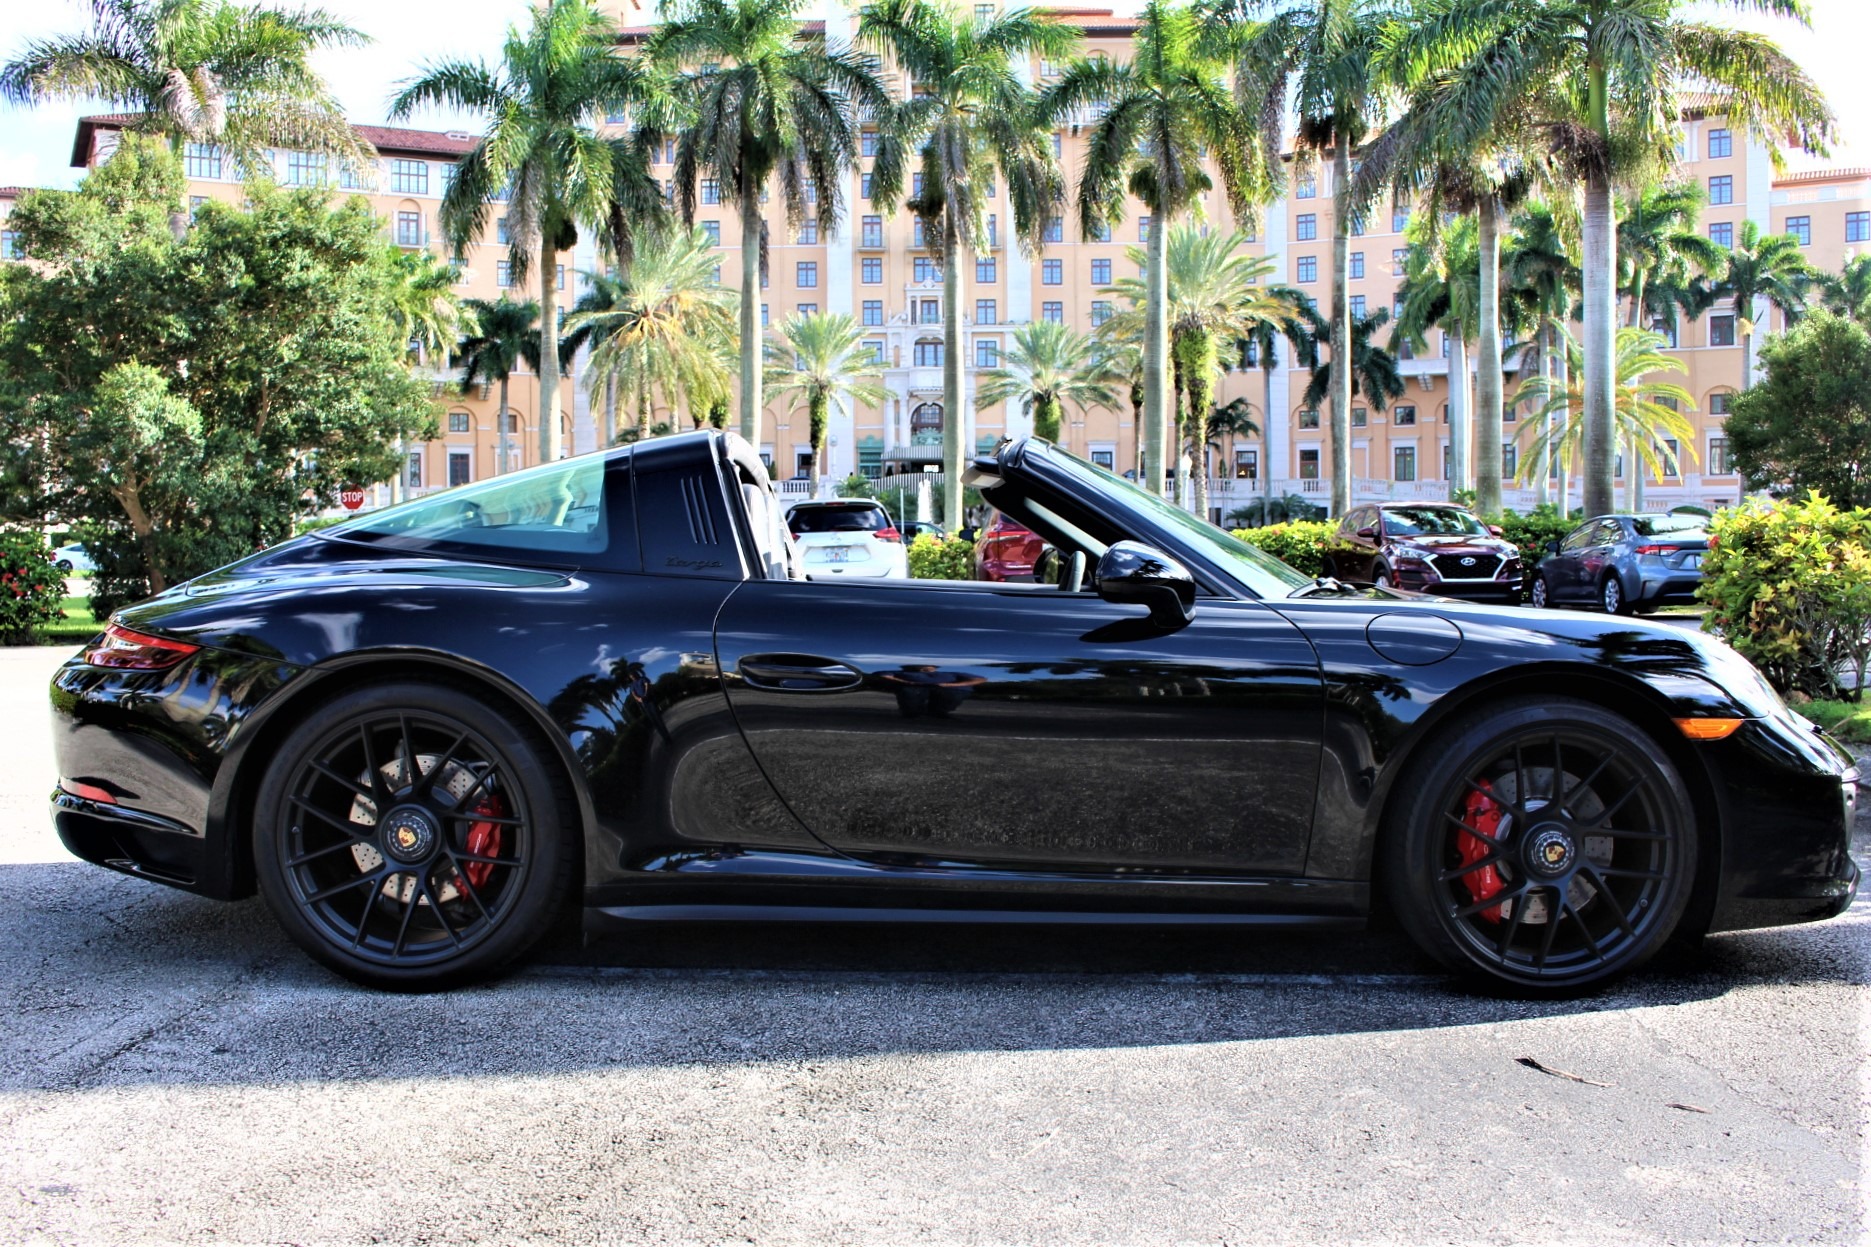 Used 2018 Porsche 911 Targa 4 GTS for sale Sold at The Gables Sports Cars in Miami FL 33146 1